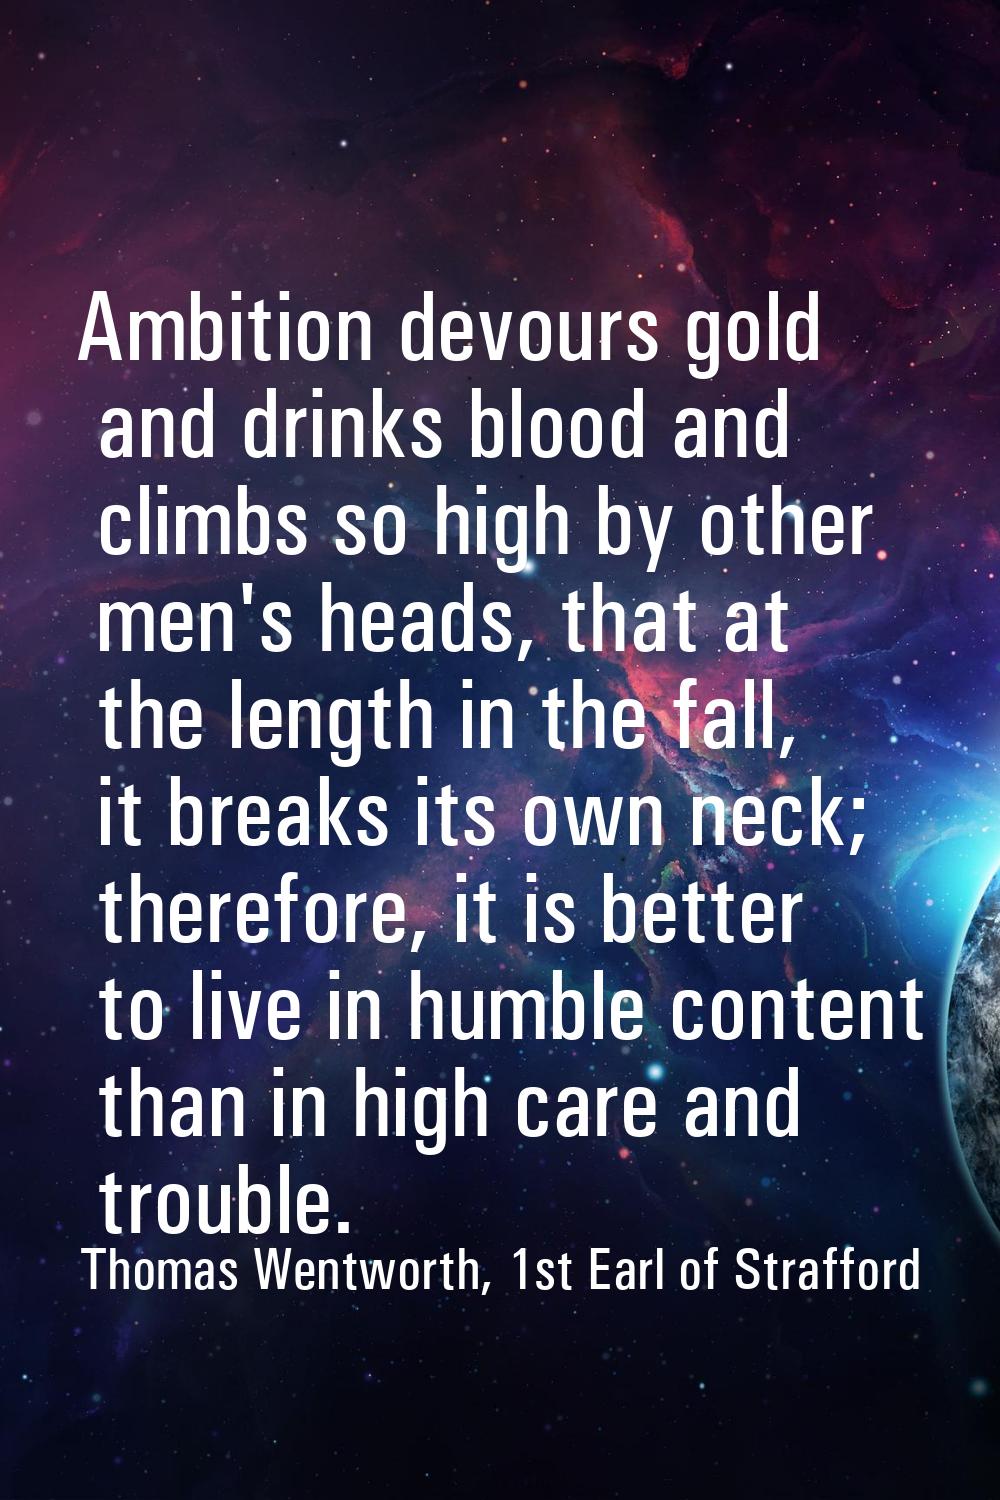 Ambition devours gold and drinks blood and climbs so high by other men's heads, that at the length 